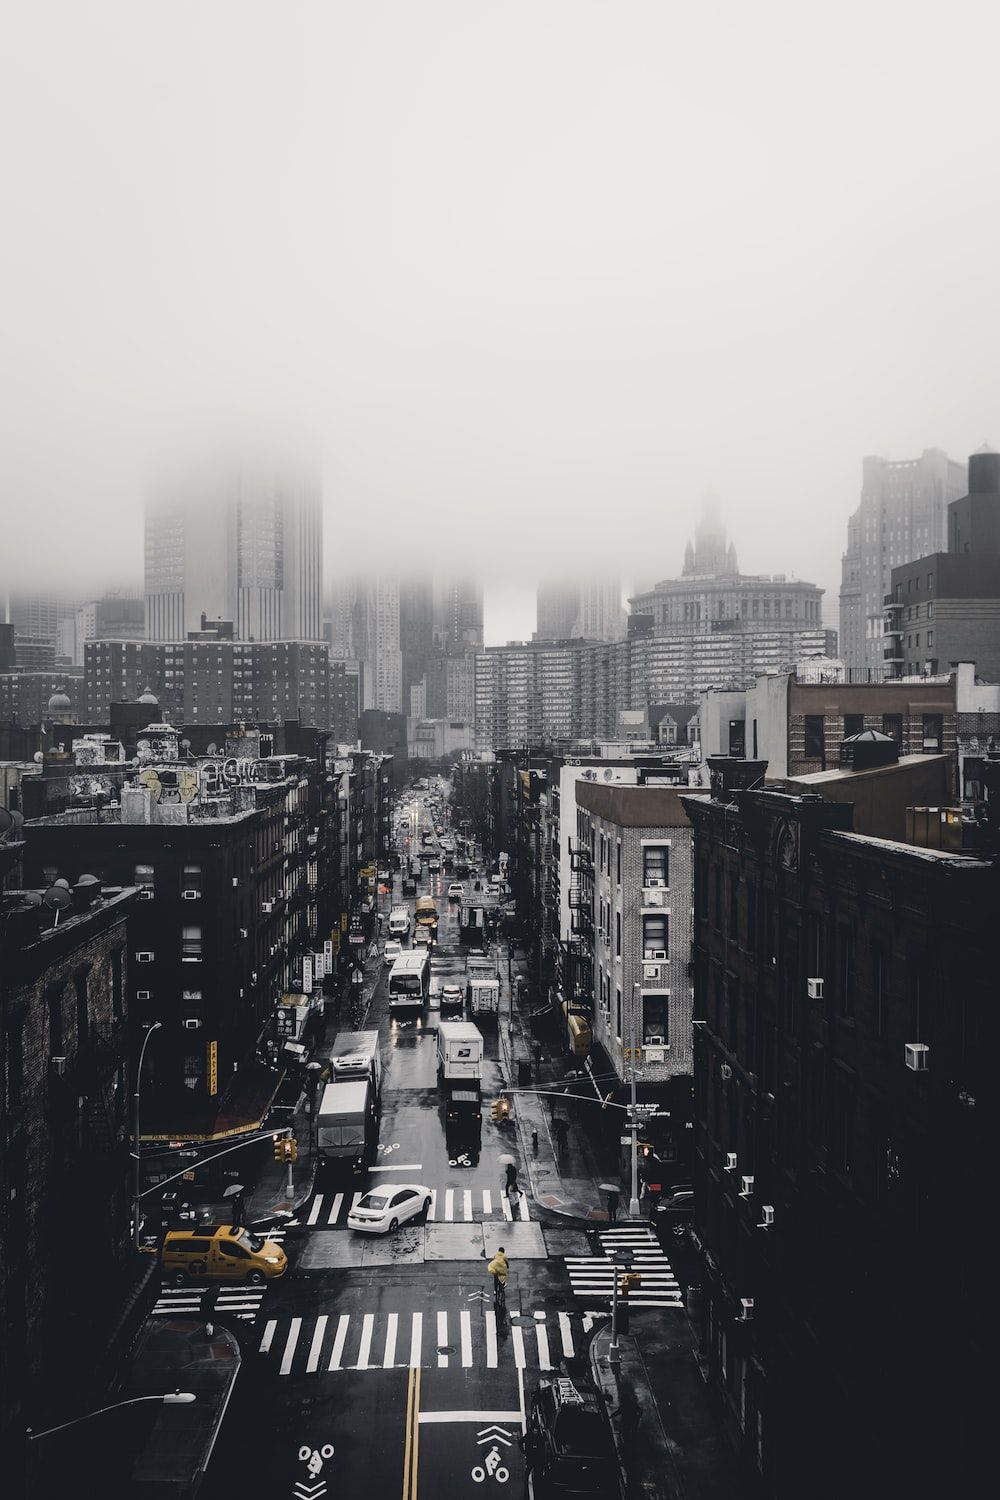 Grayscale photo of a city street - Cityscape